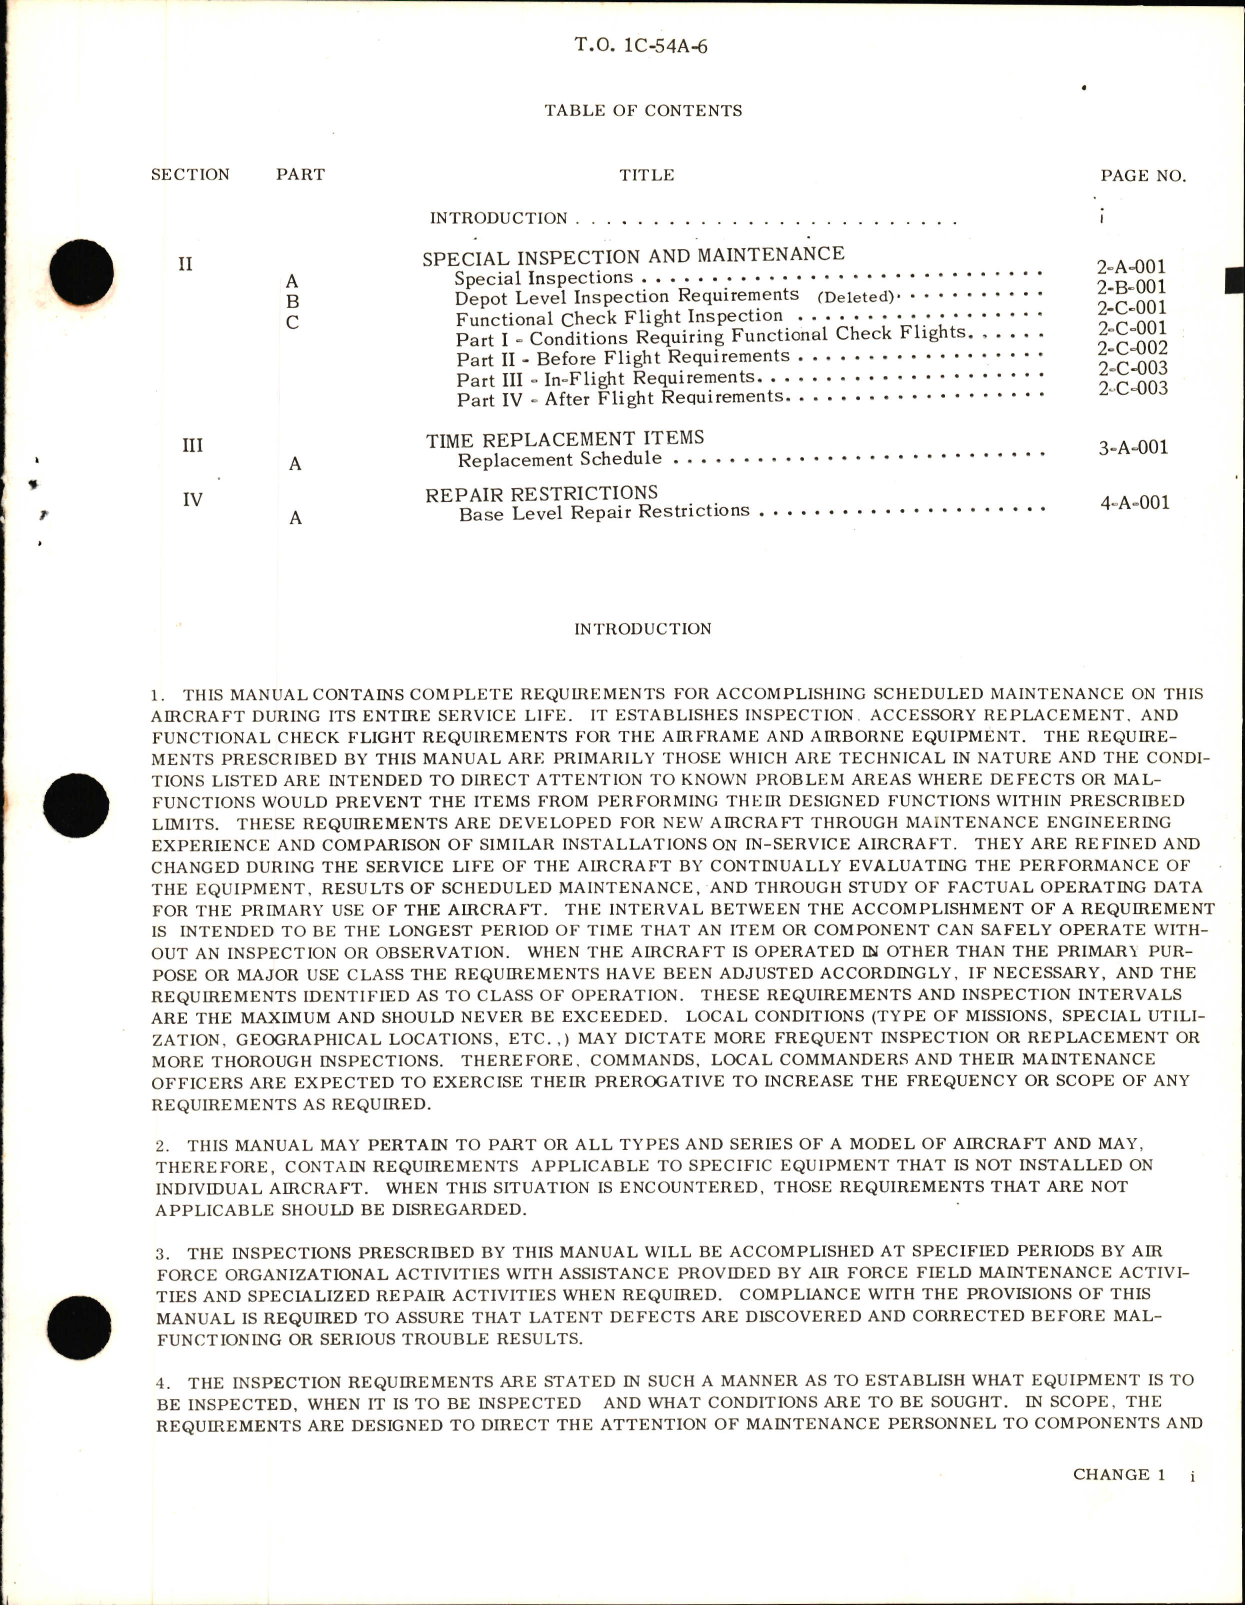 Sample page 3 from AirCorps Library document: Aircraft Scheduled Inspection and Maintenance Requirements for C-54